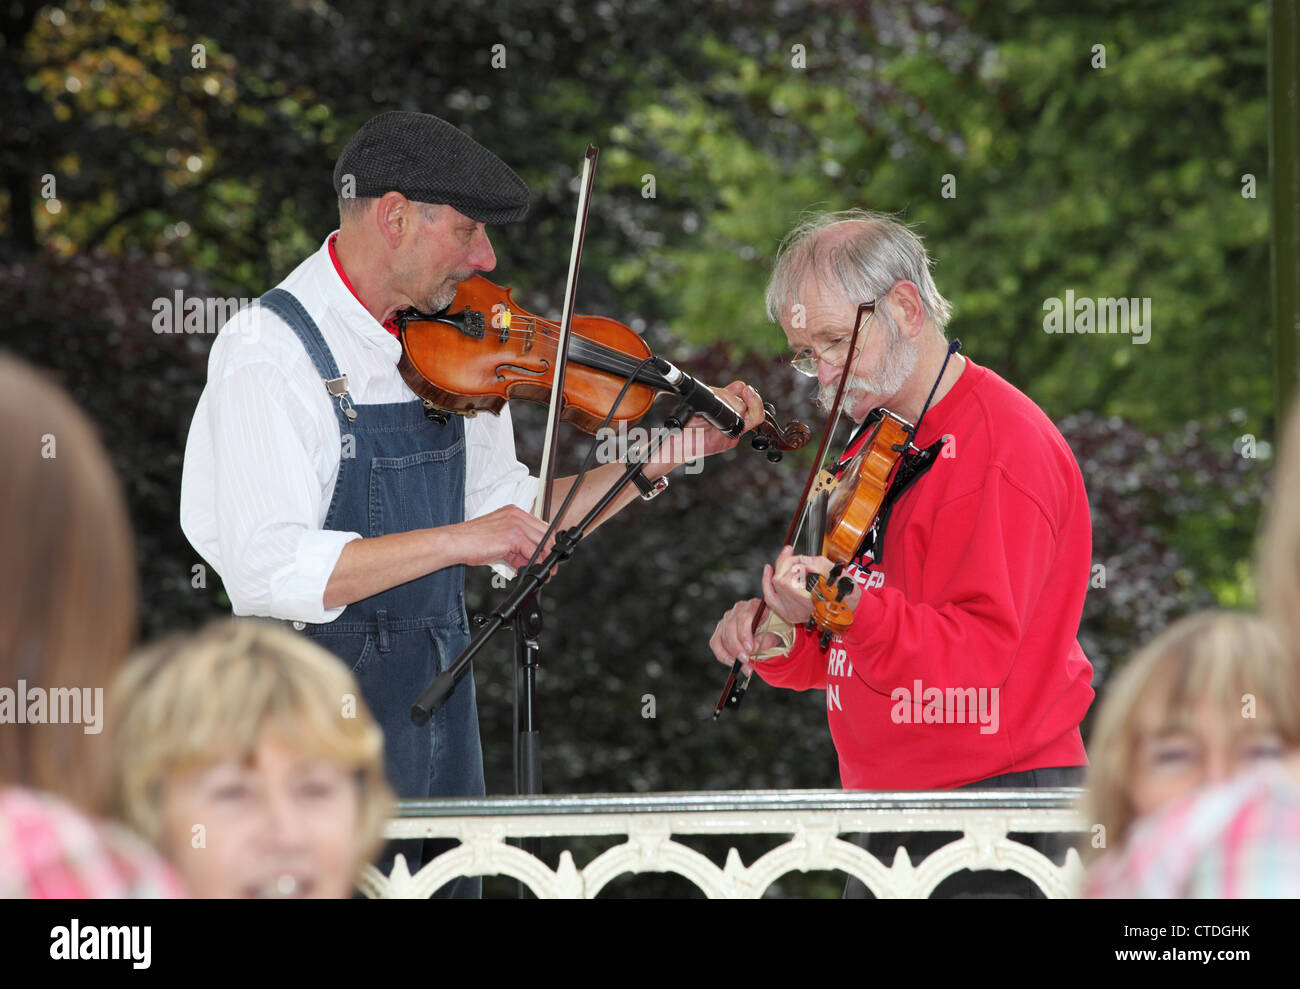 Fiddlers playing Appalachian old time folk music at the Big Dance event in Hexham Northumberland England Stock Photo